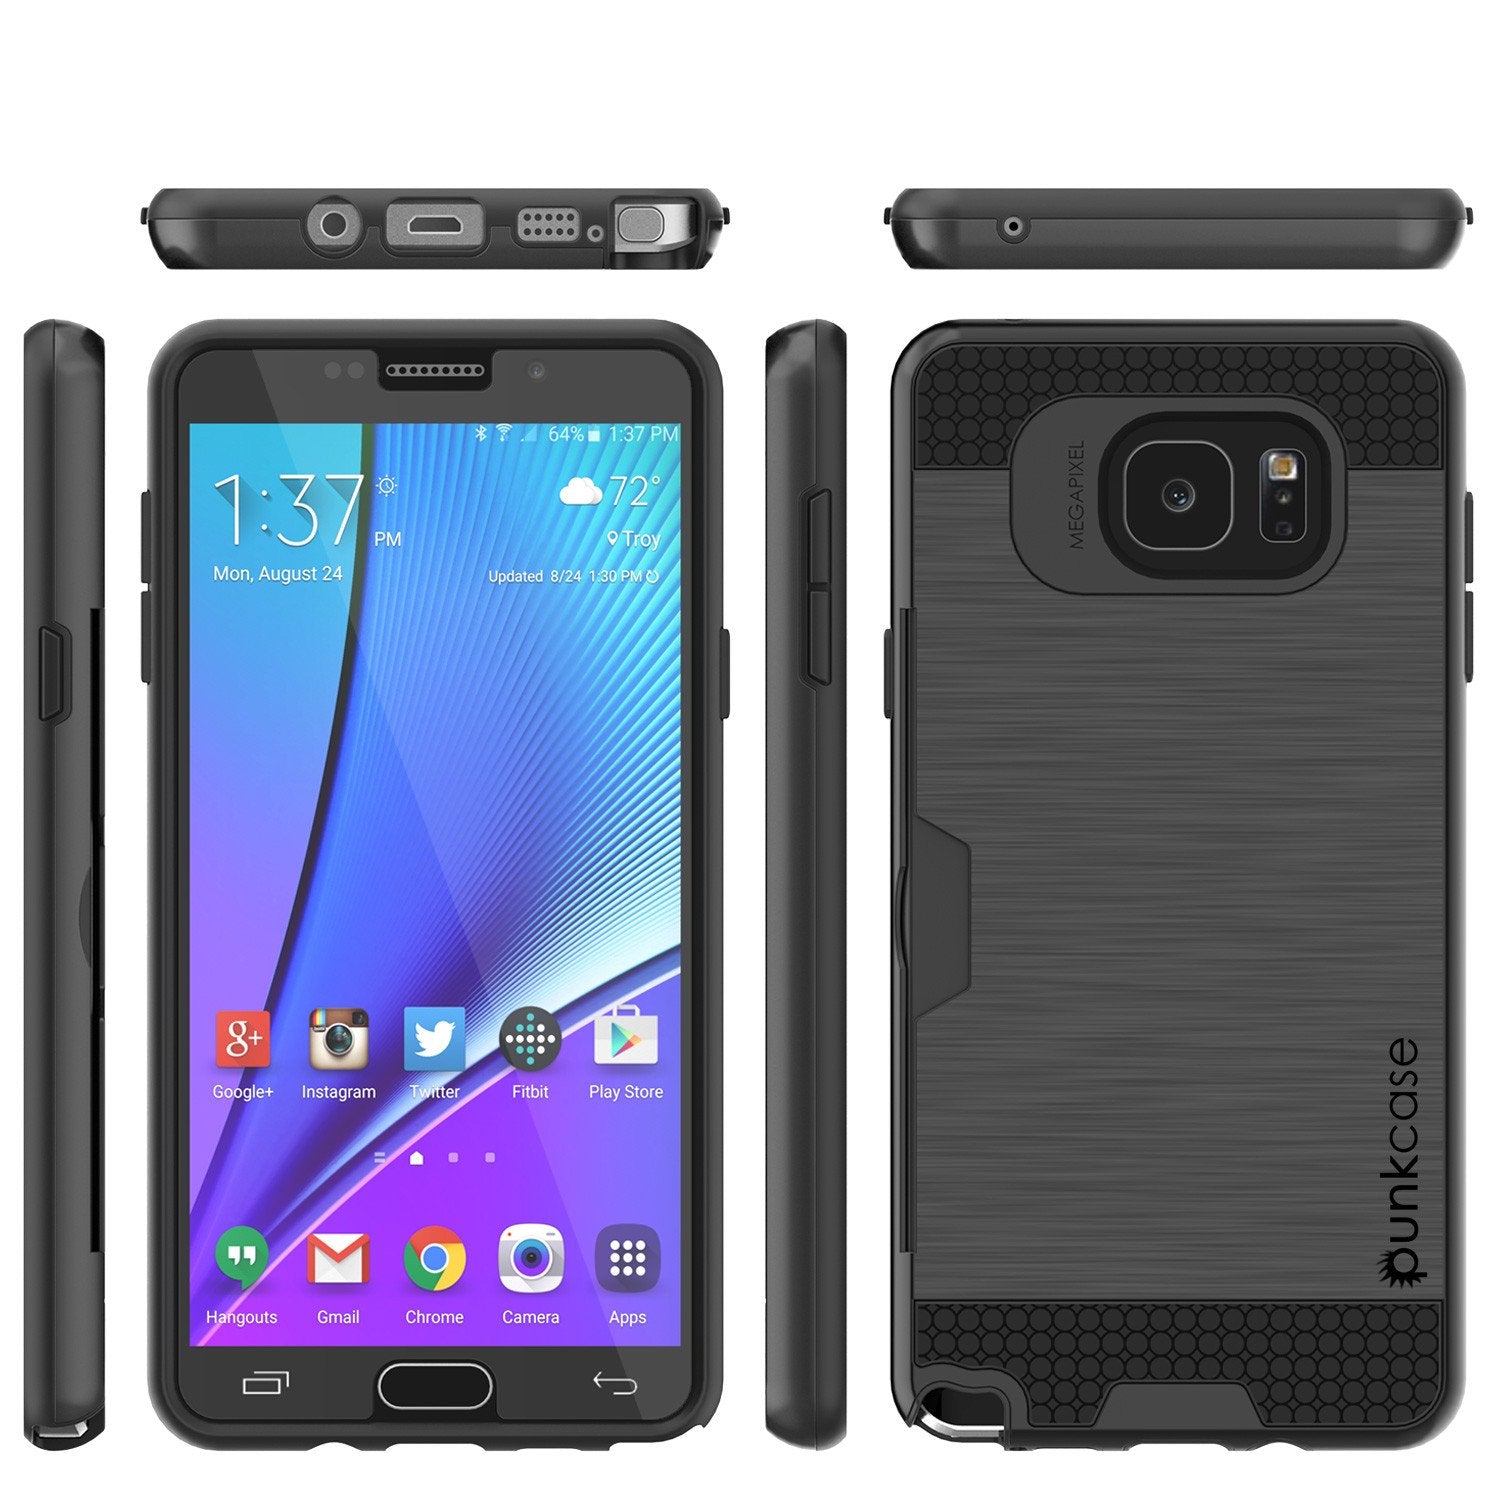 Galaxy Note 5 Case PunkCase SLOT Black Series Slim Armor Soft Cover Case w/ Tempered Glass - PunkCase NZ